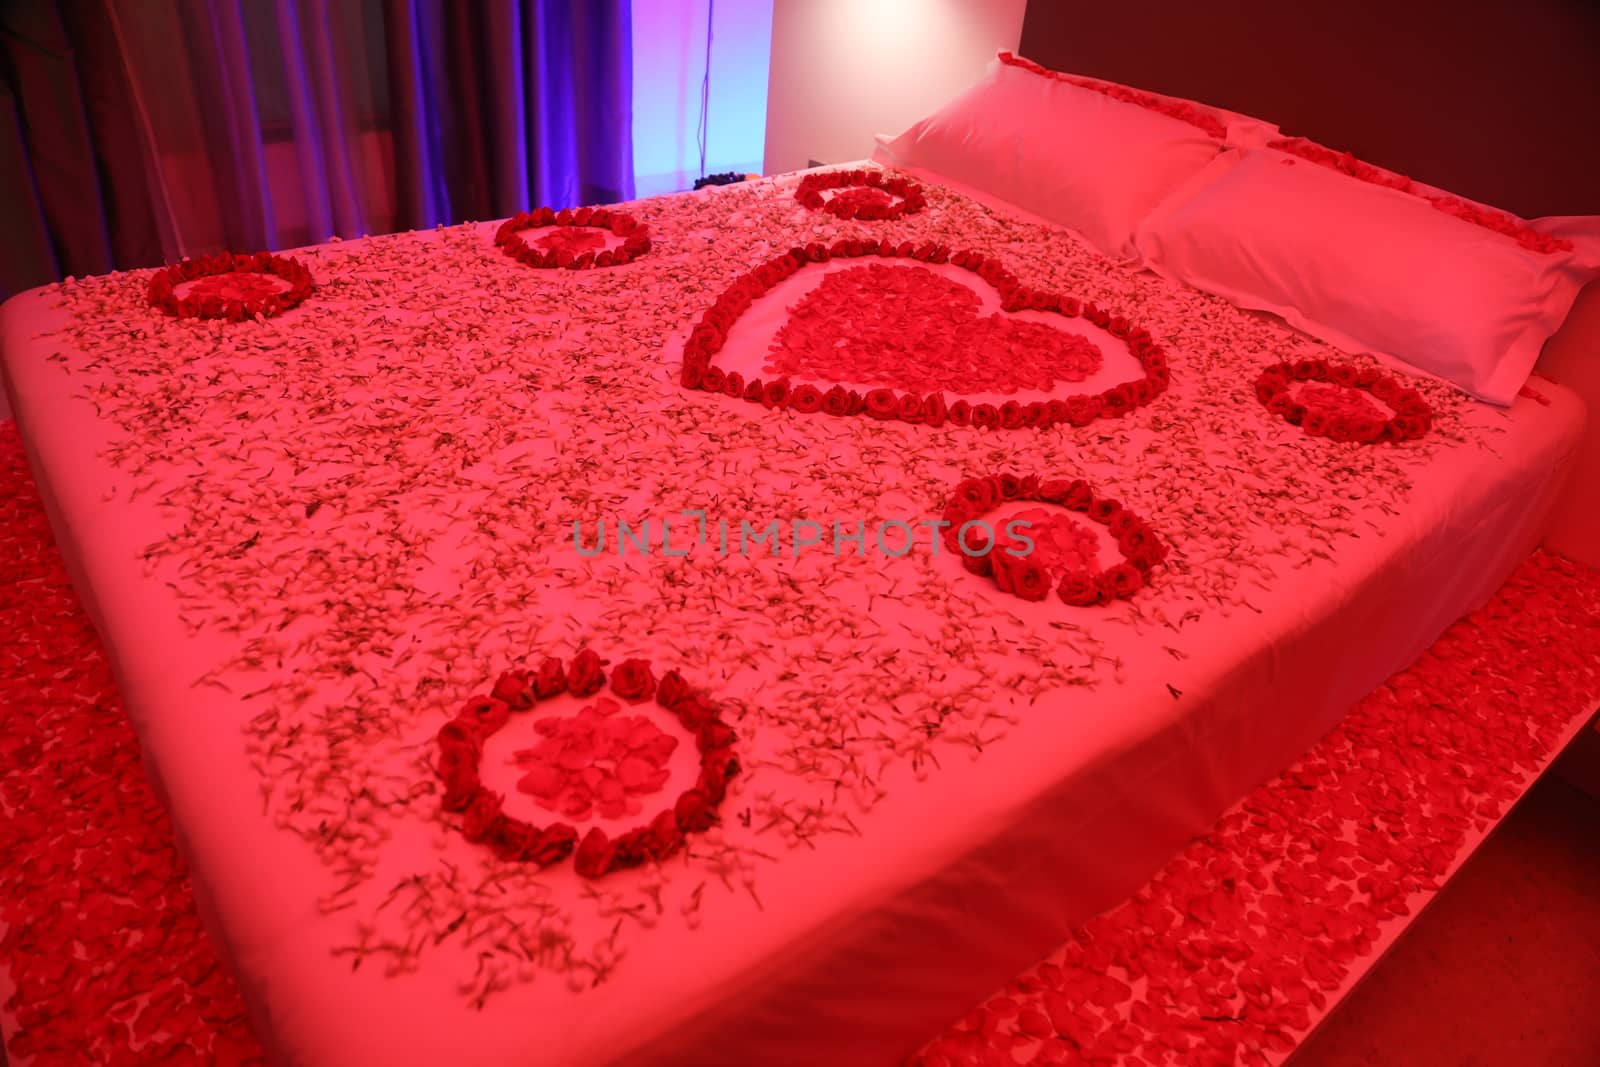 Flowers decoration at function